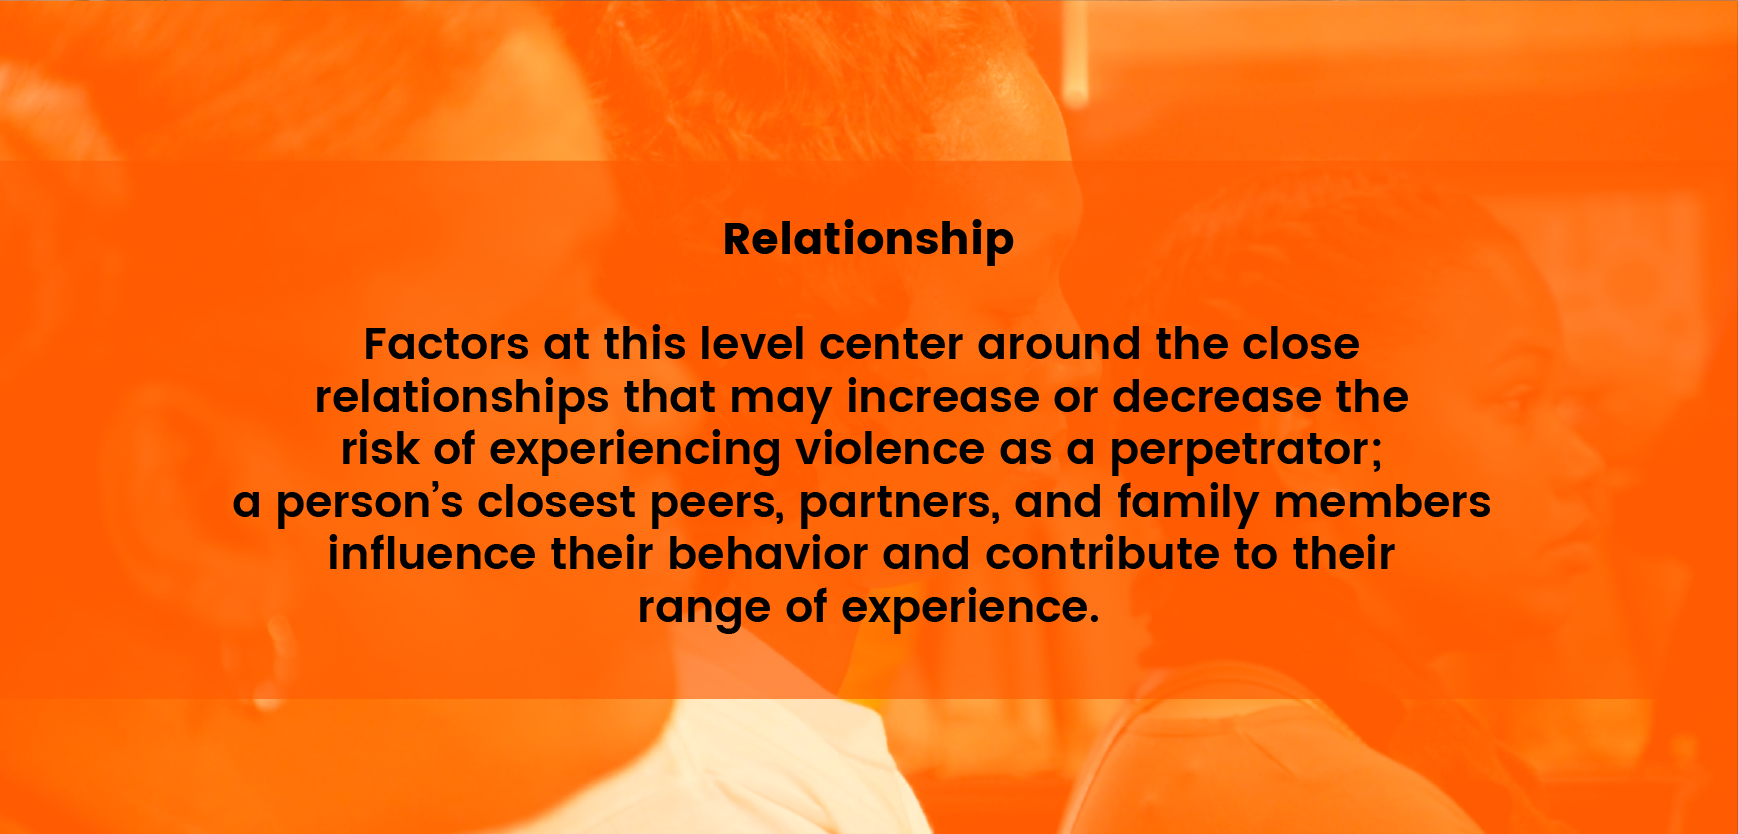 Relationship - Factors at this level center around the close relationships that may increase or decrease the risk of experiencing violence as a perpetrator; a person’s closest peers, partners and family members influence their behavior and contribute to their range or experience.